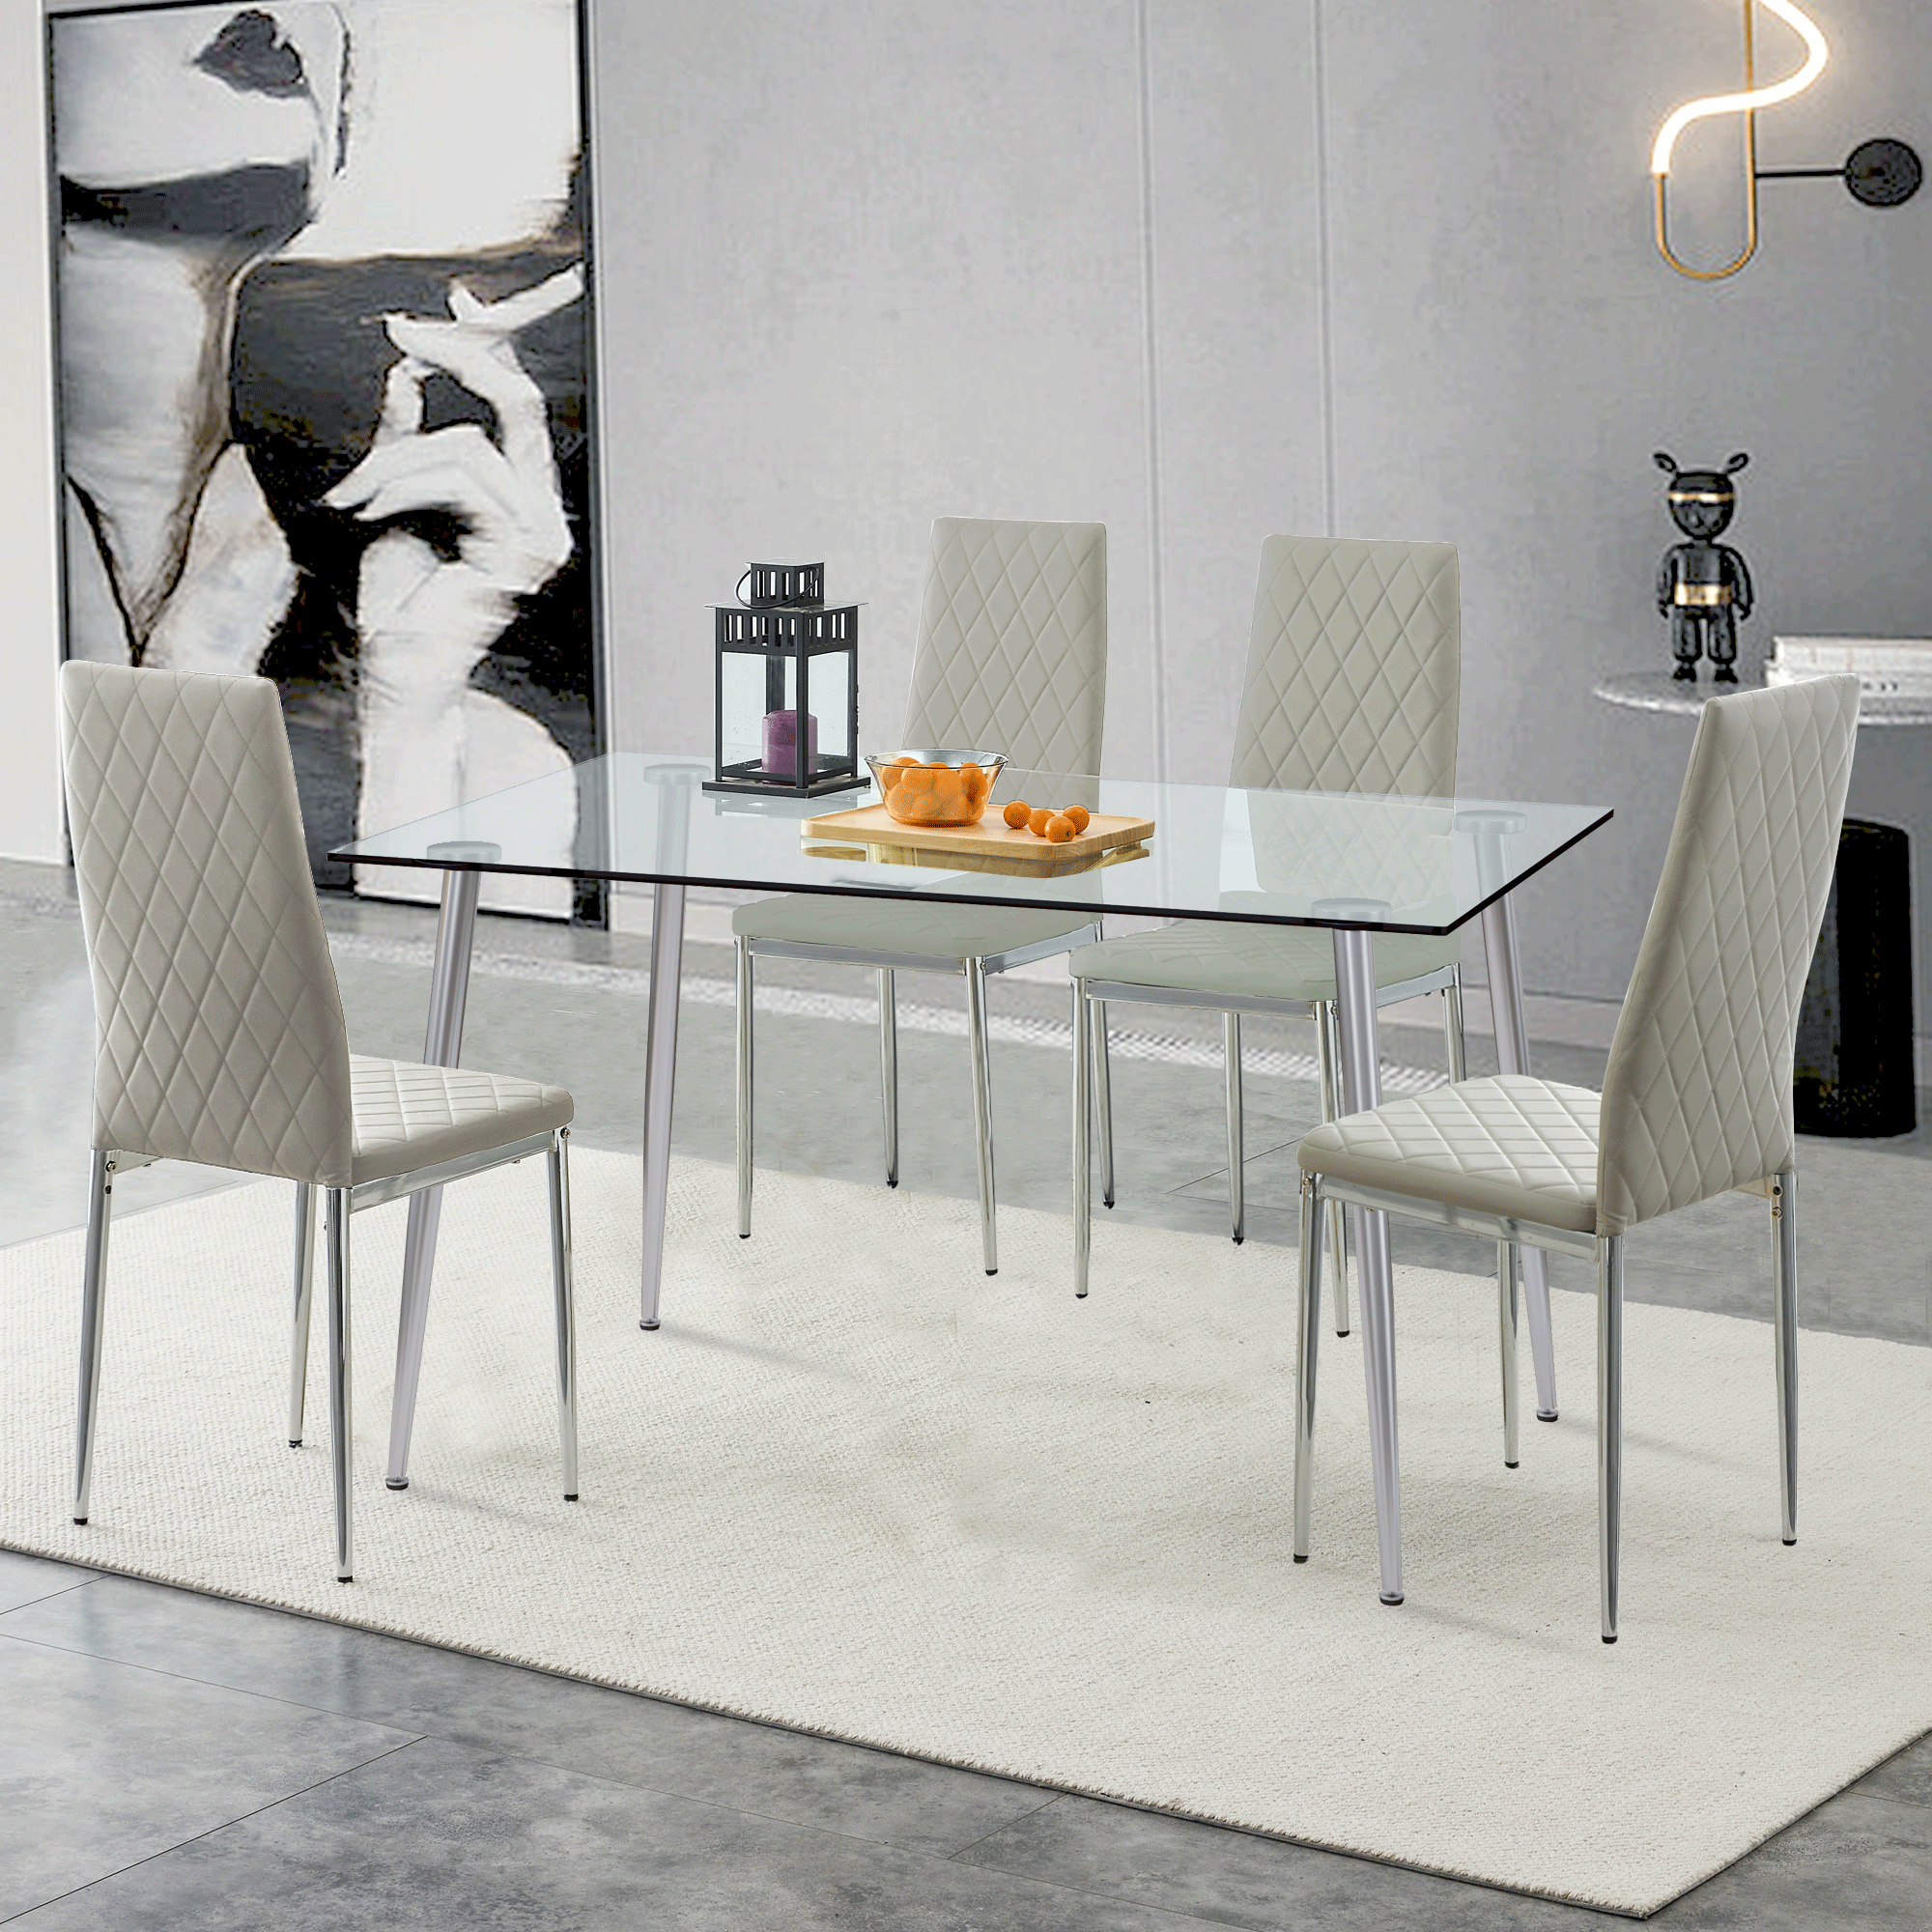 Halland 51.2"x 31.5" 5pc Modern Glass Dining Set Table and 4 Light Gray Dining Chairs